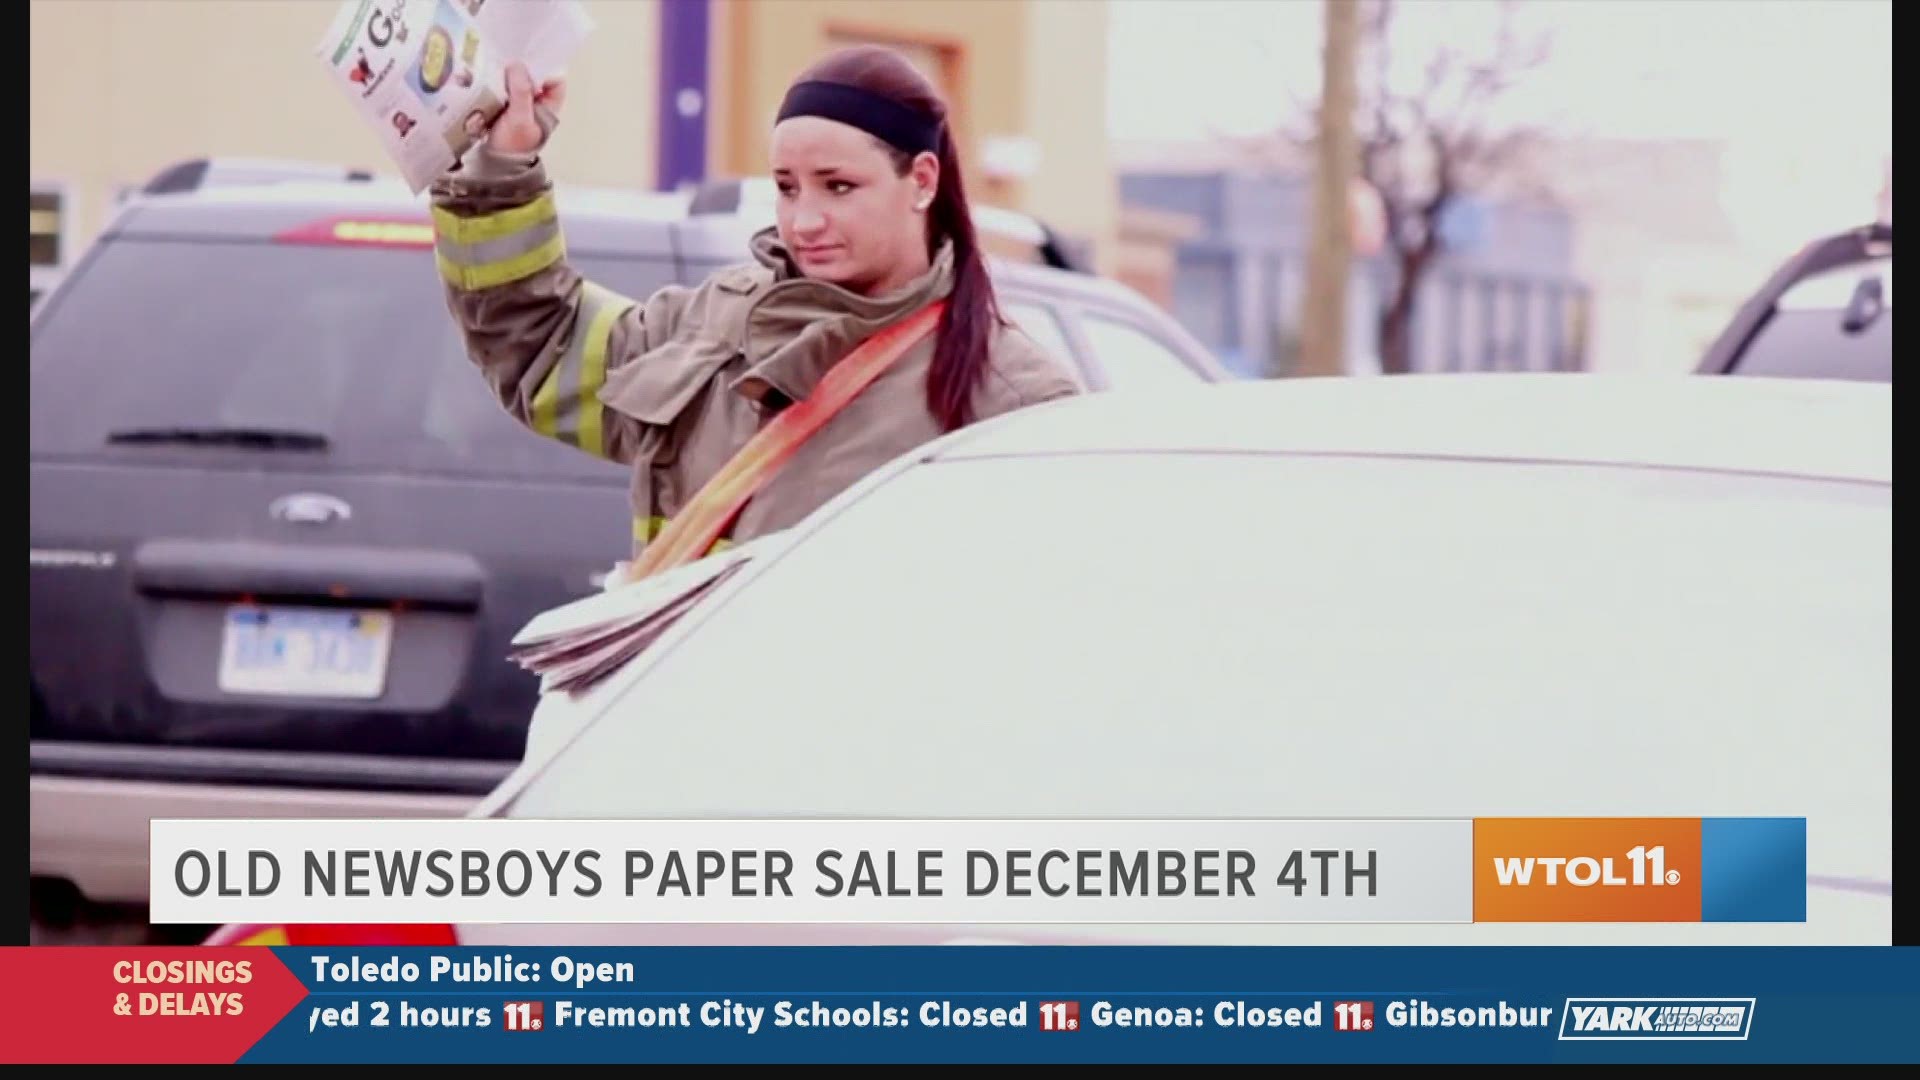 The Old Newsboys Charity Paper Drive is happening later this week, here's how you can give back!